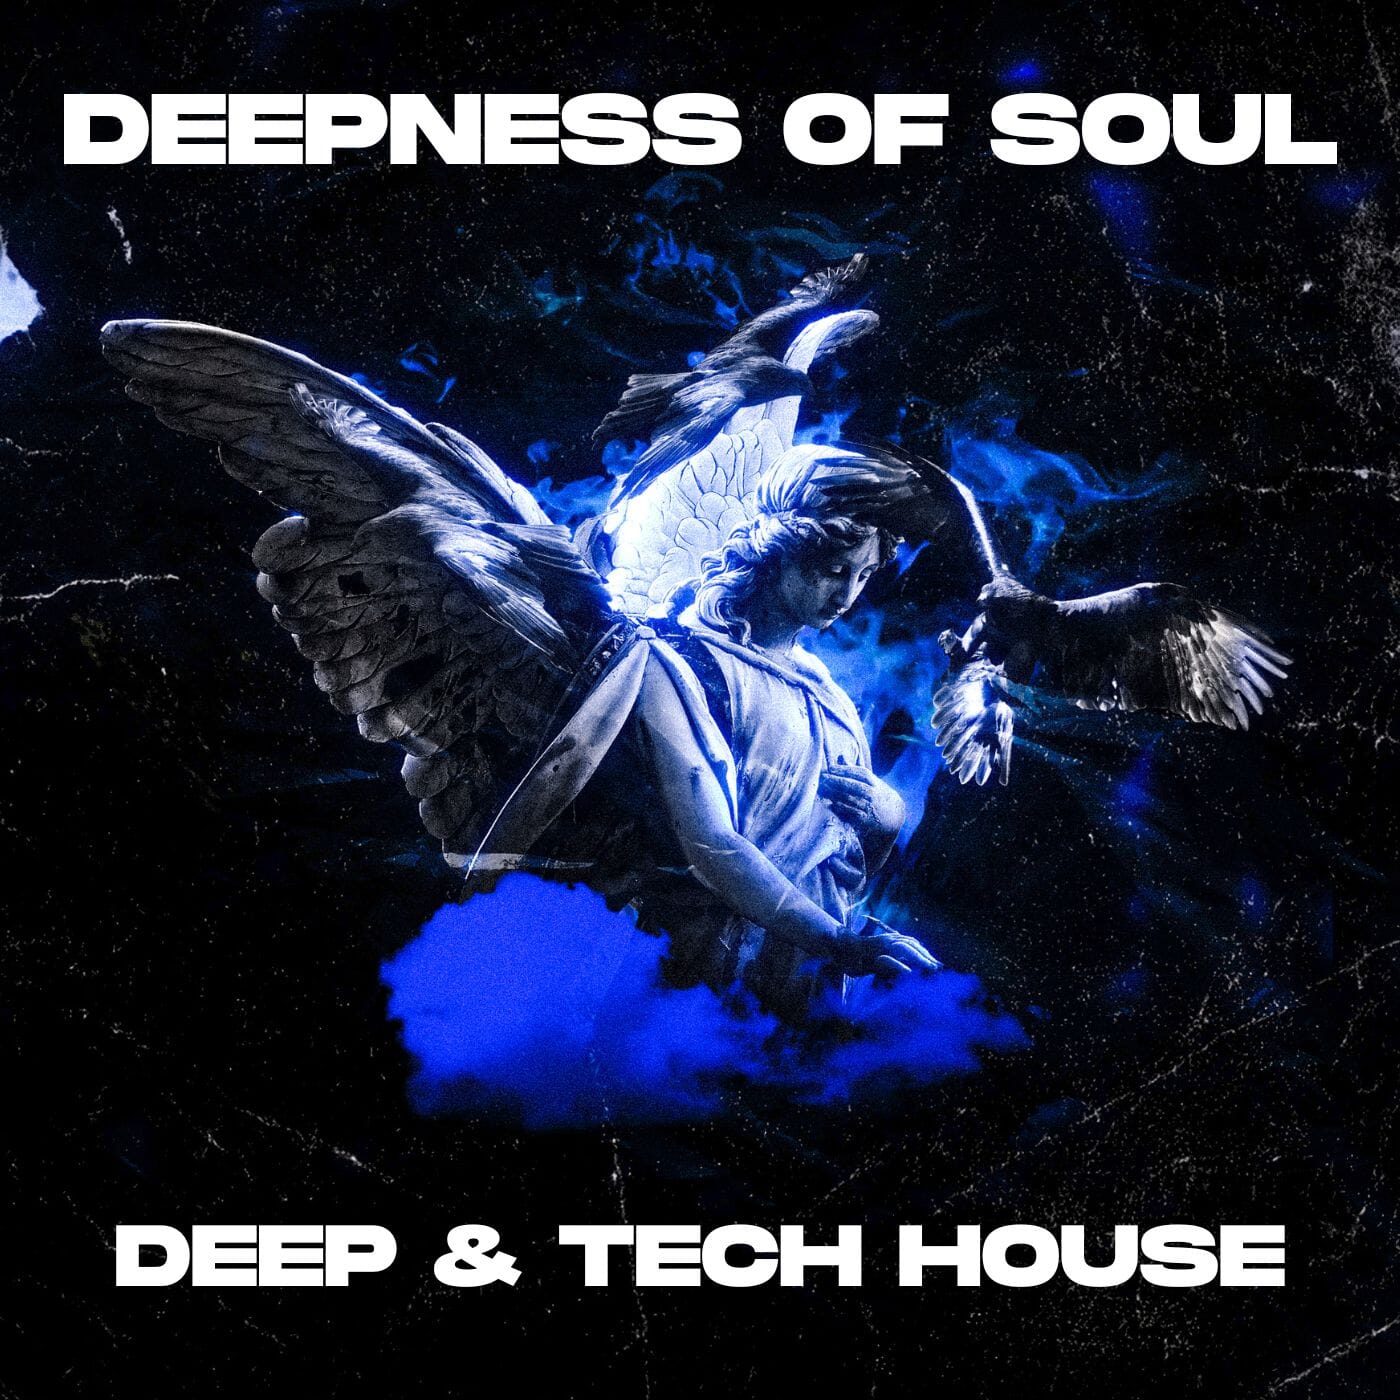 Deepness of Soul - Tech House Sample Pack (Loops and Serum presets) Sample Pack Innovation Sounds